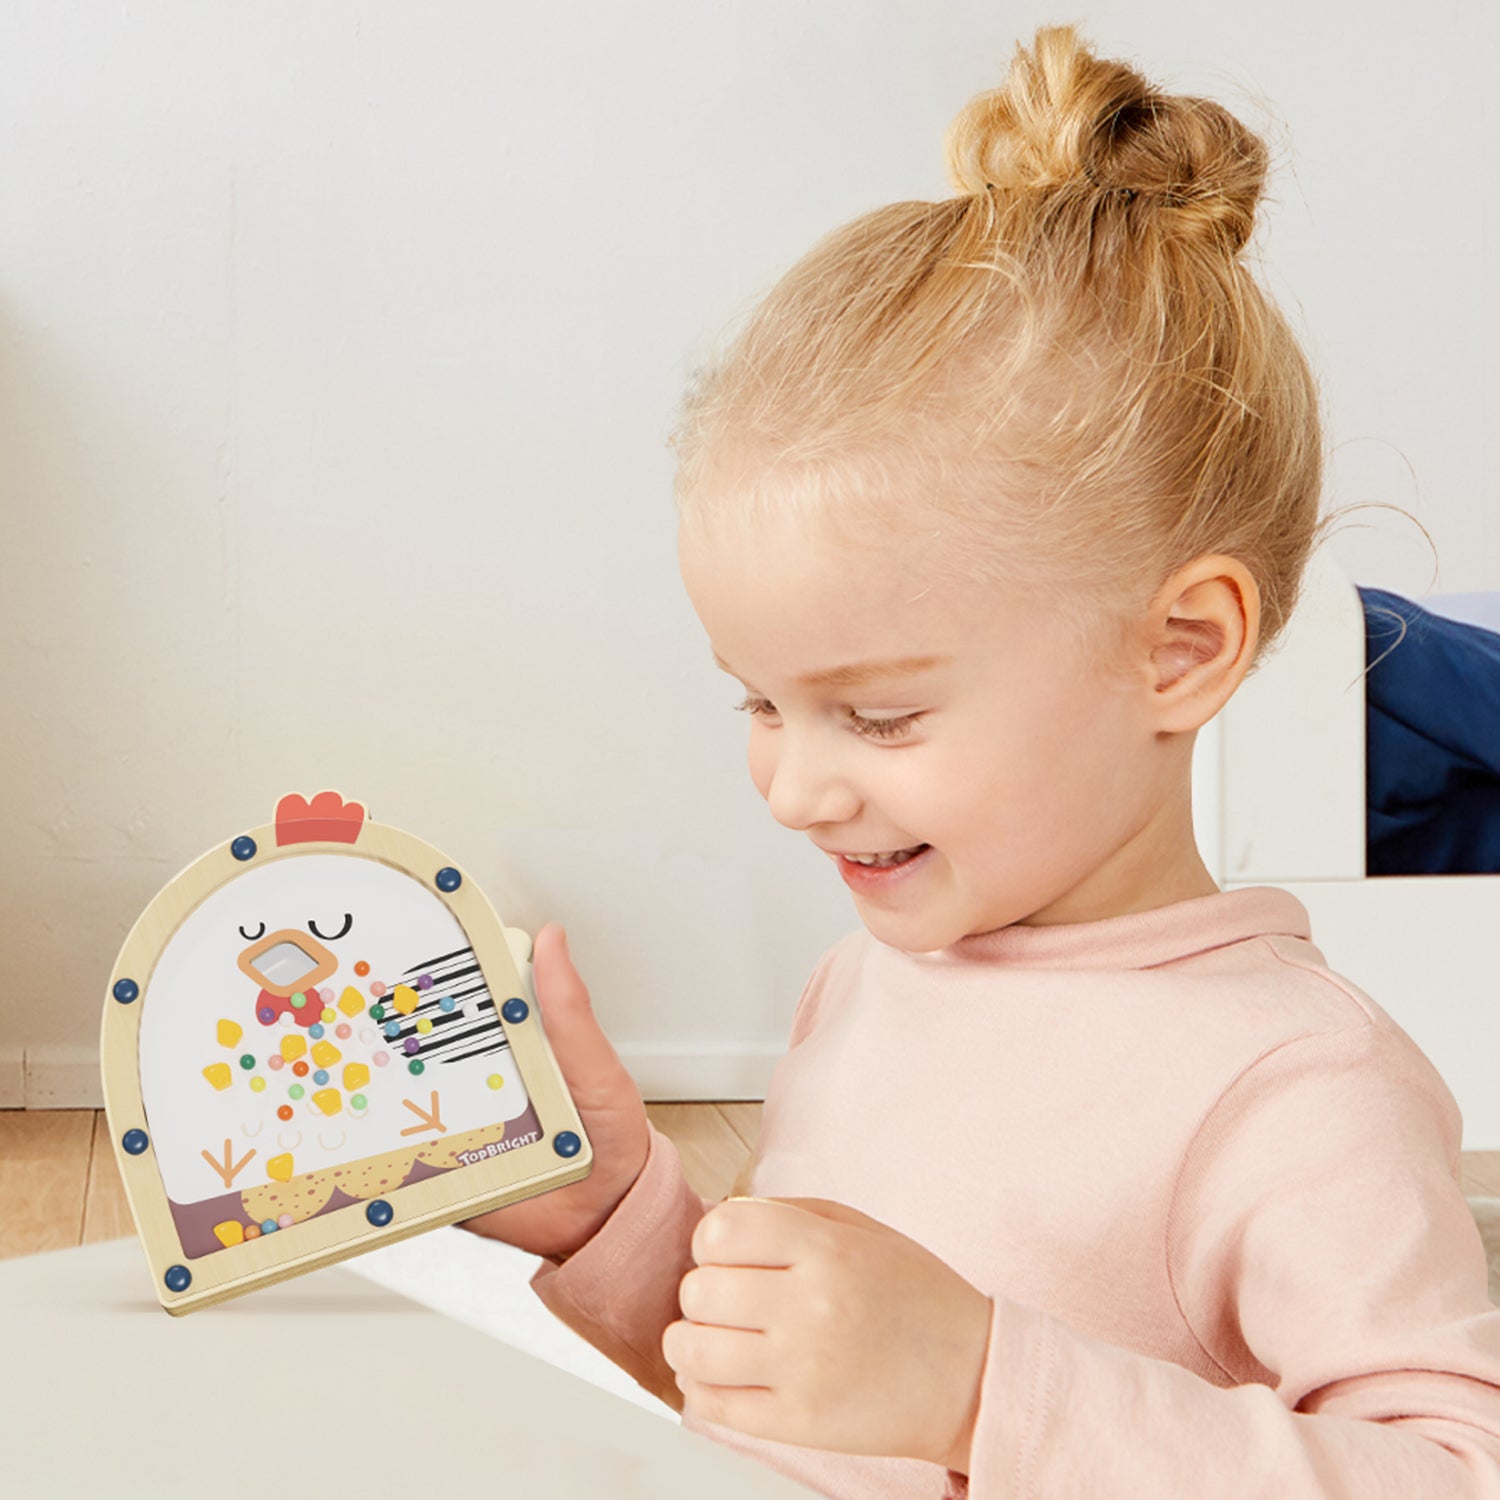 The game helps children to focus and concentrate. In an entertaining way, Feed the Hen promotes their fine motor skills and trains patience and dexterity.